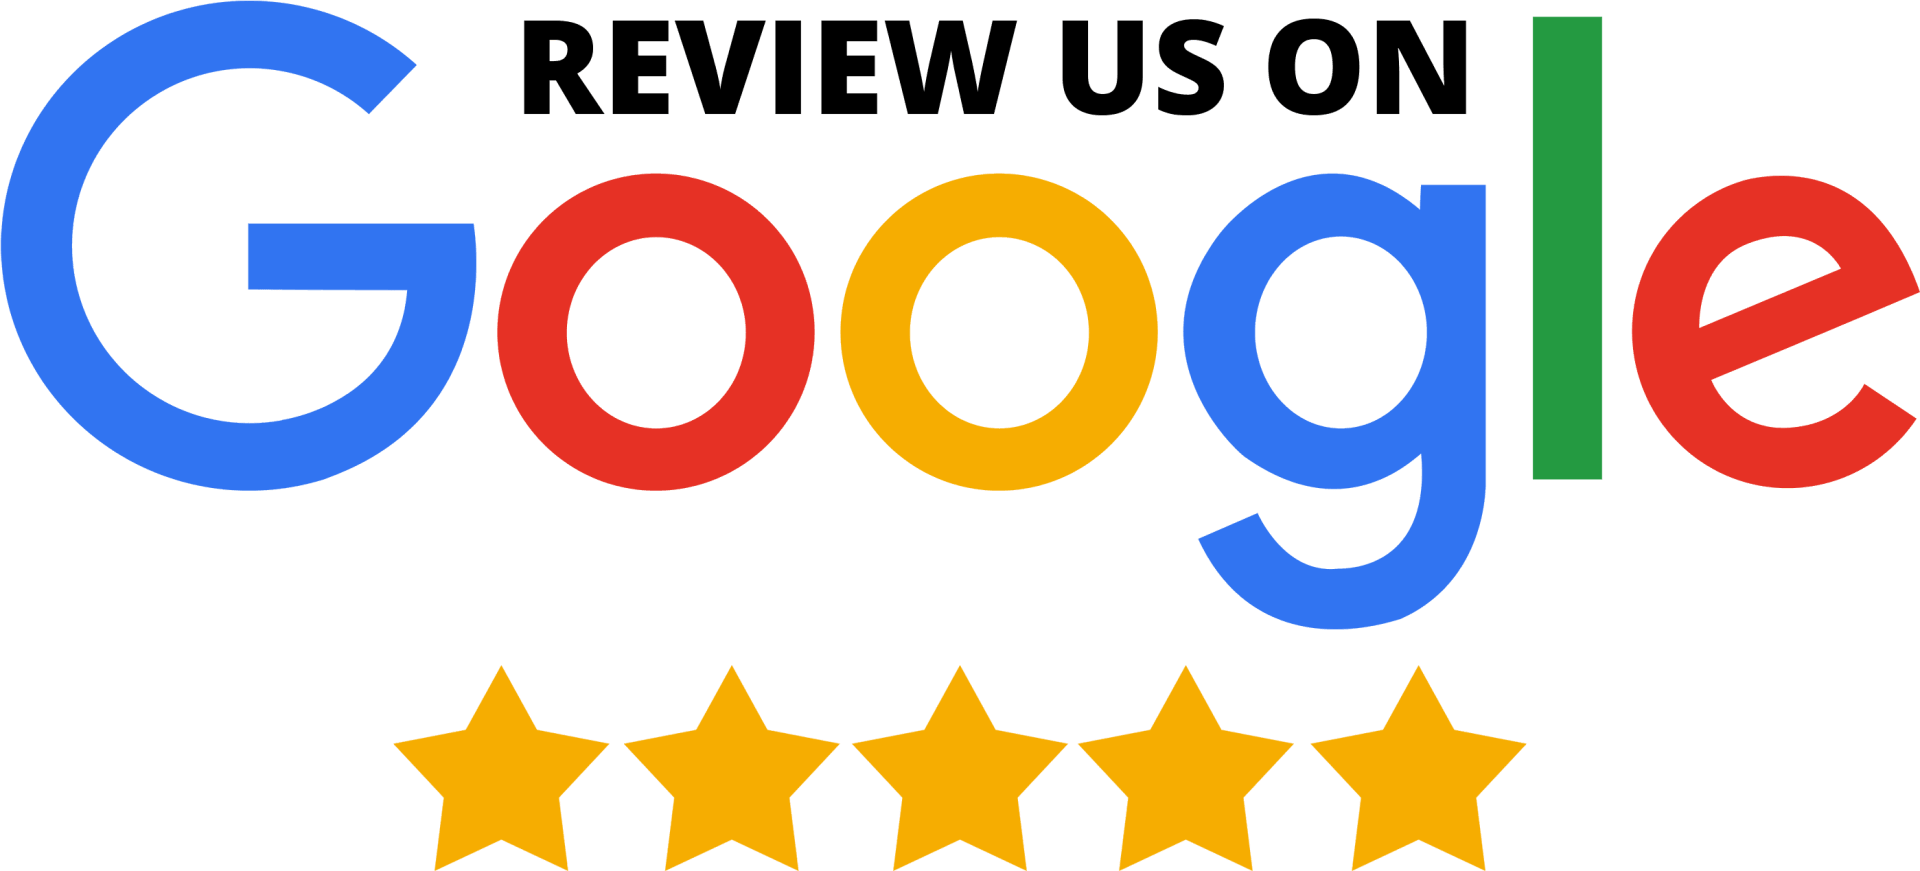 Review us on Google Icon with 5 star rating